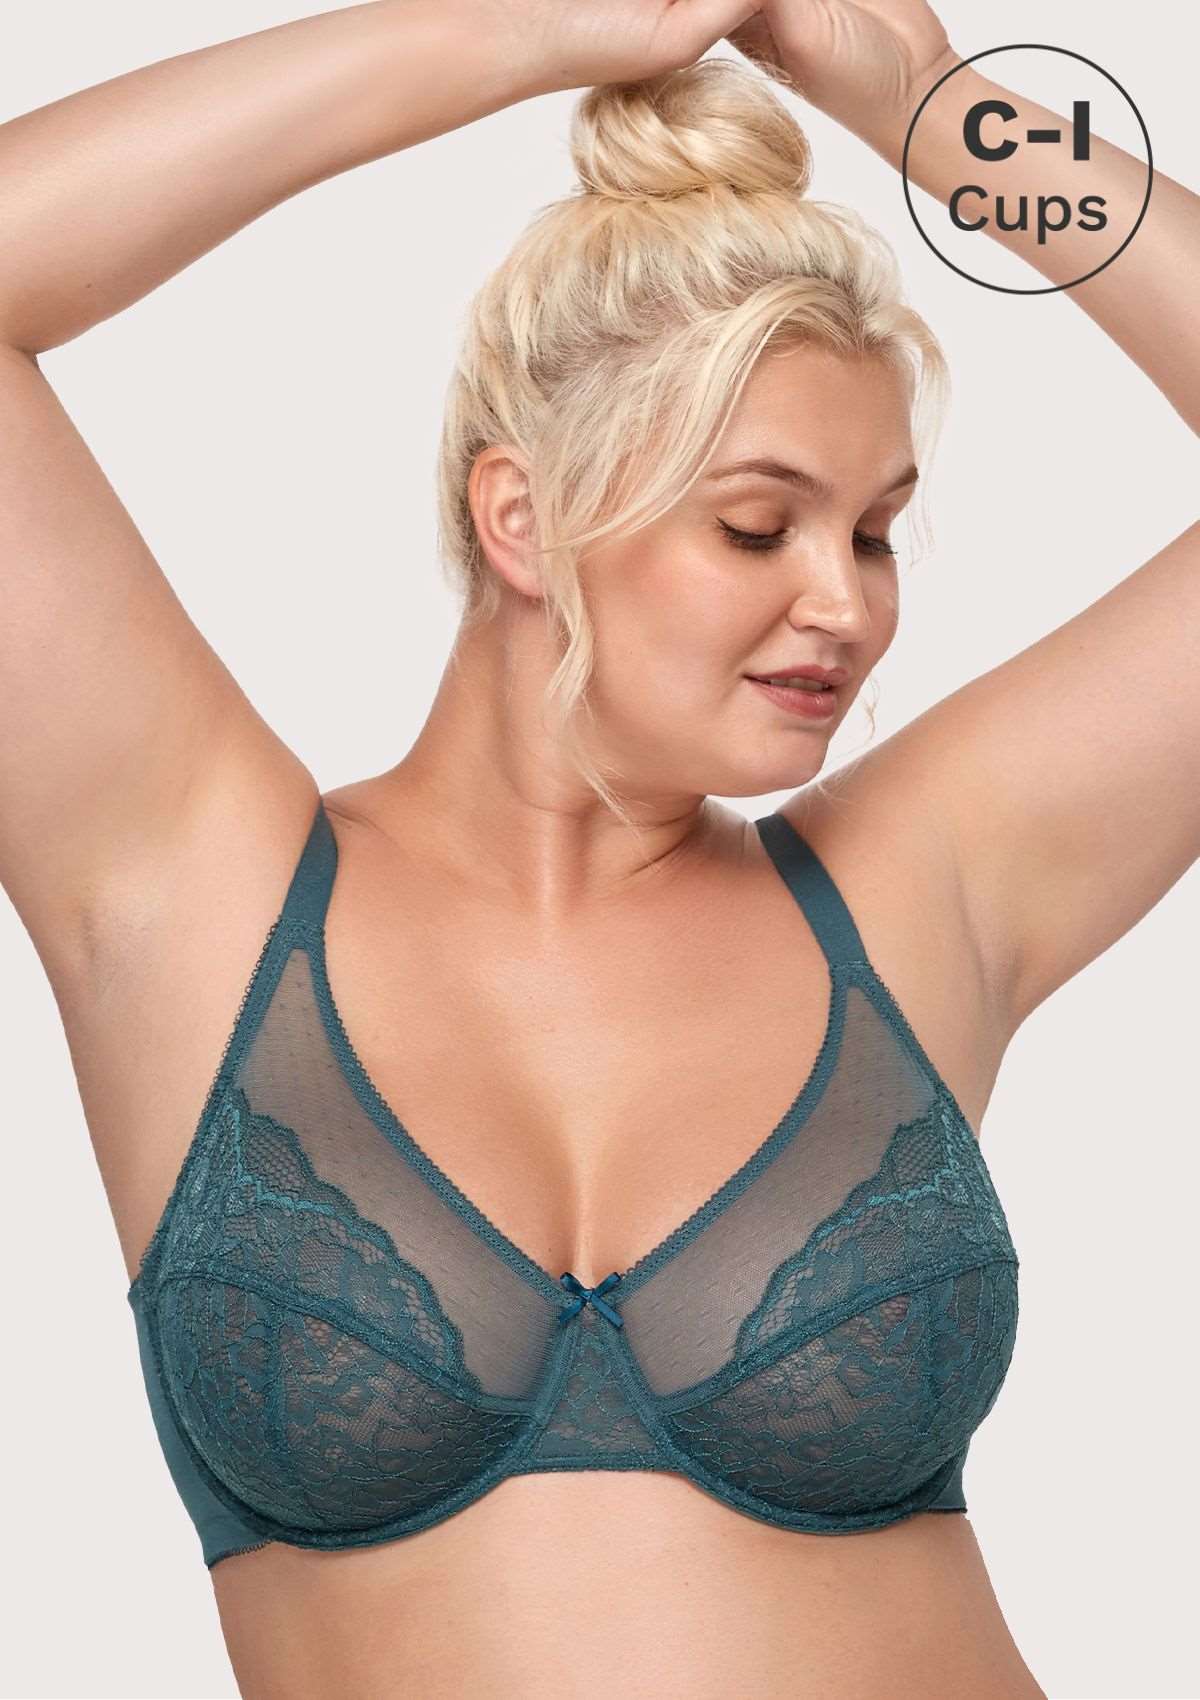 HSIA Enchante Full Coverage Bra: Supportive Bra For Big Busts - Balsam Blue / 44 / G